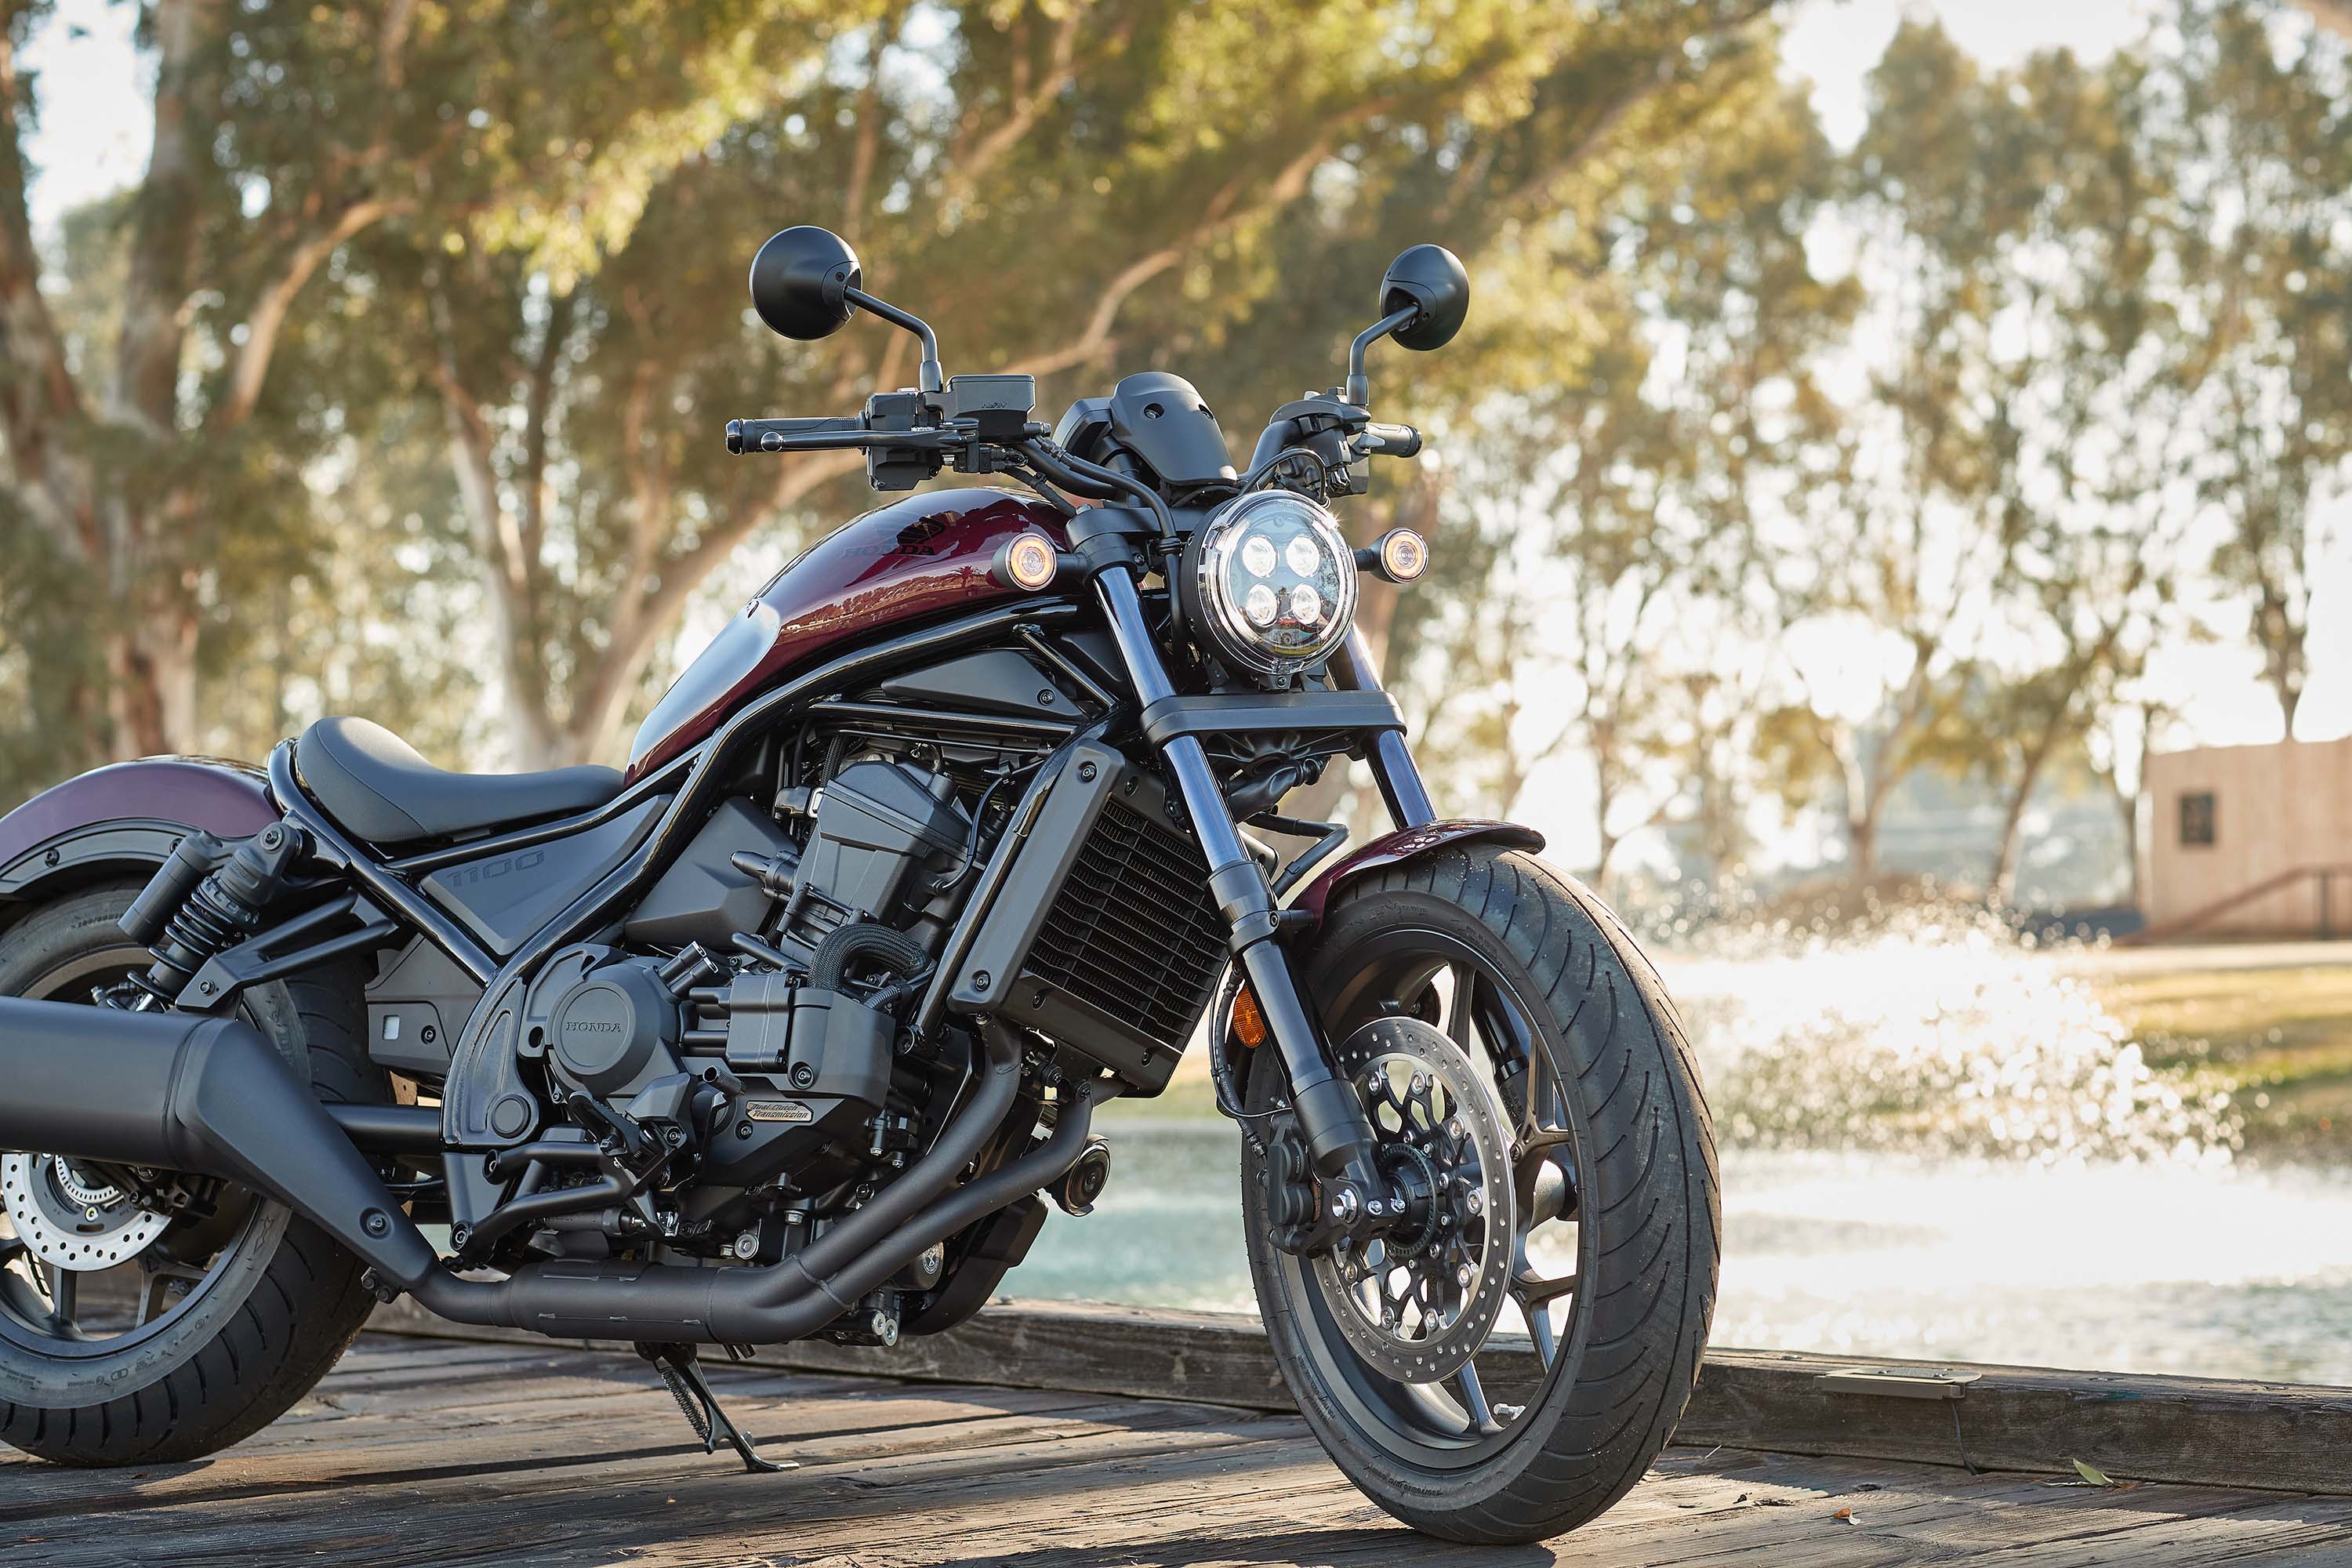 What It’s Like Riding the Honda Rebel 1100 DCT, A Review - Asphalt & Rubber